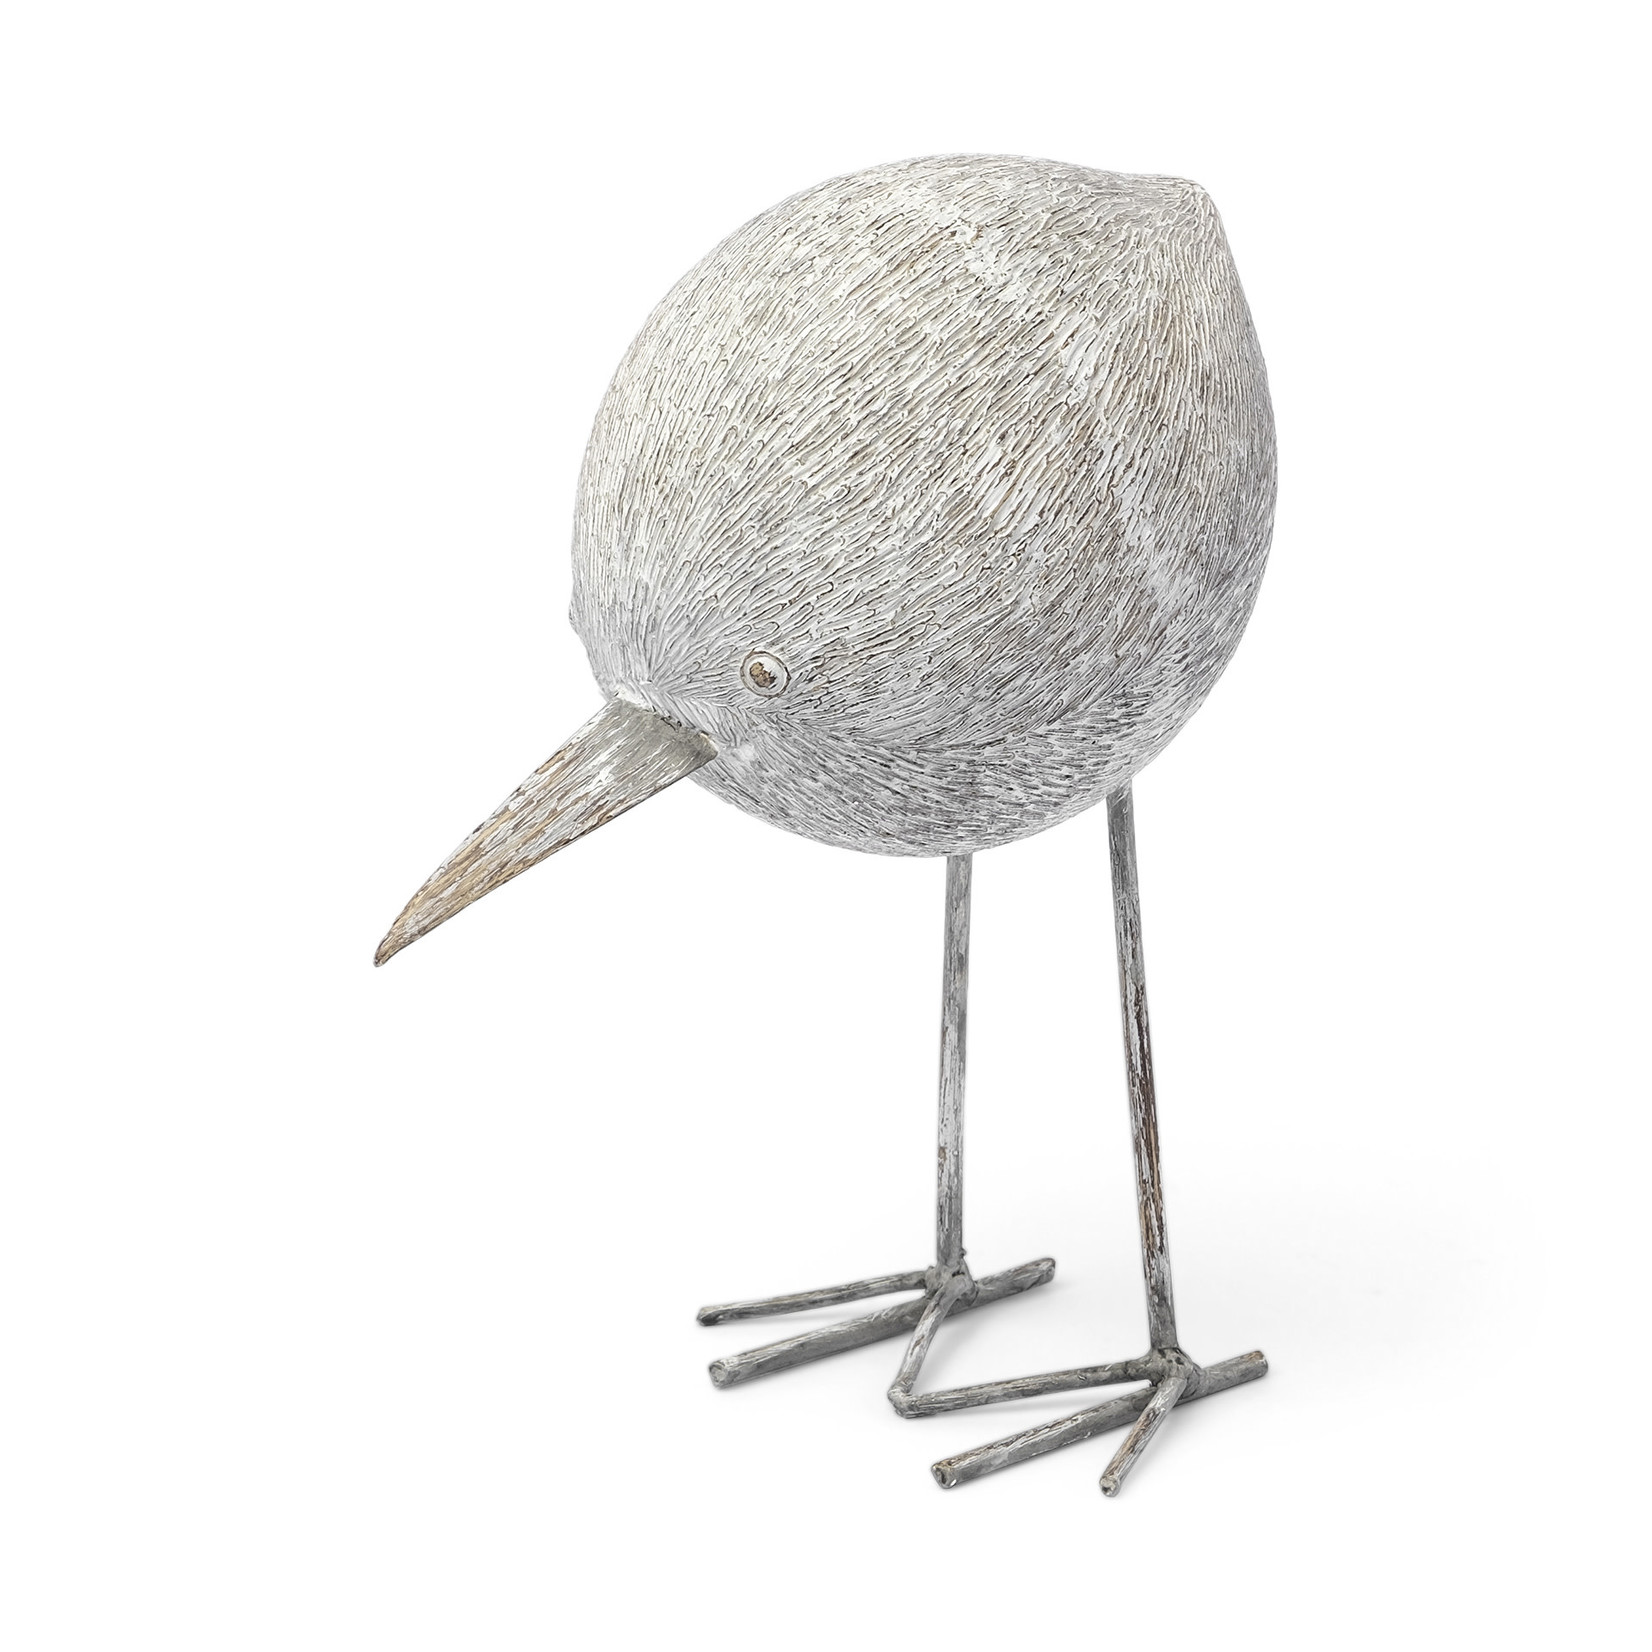 Snipe II Off White Resin Bird Ornament with Metal Feet